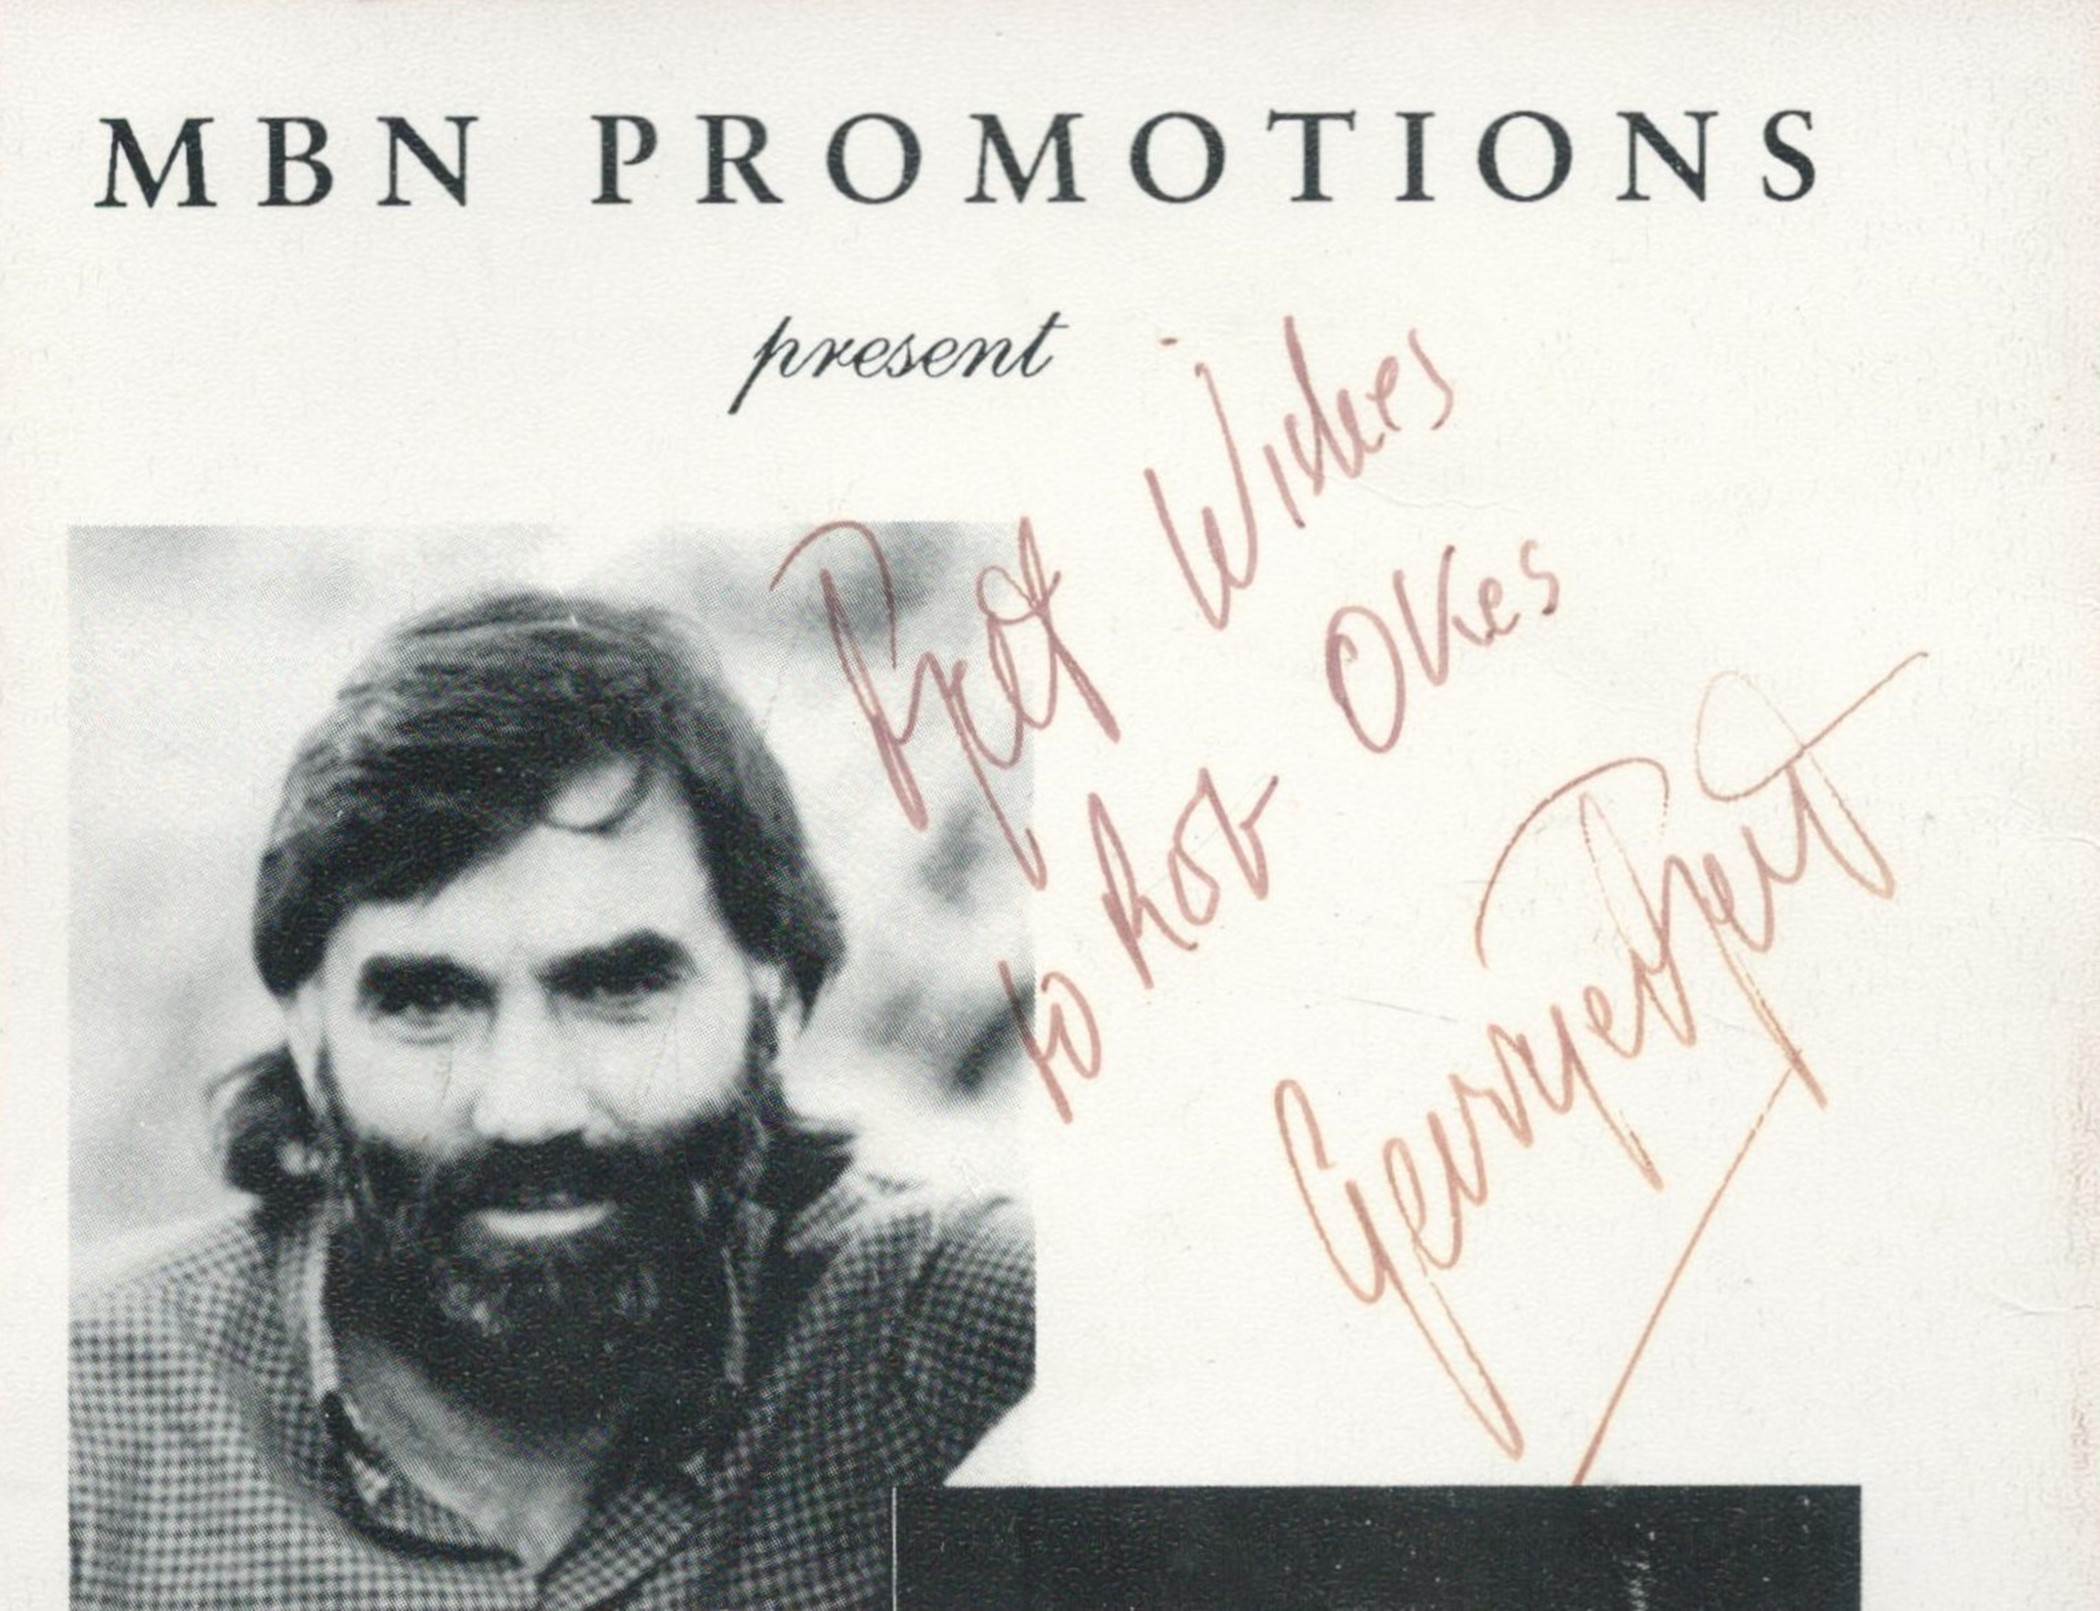 Football George Best Signed 5x4 inch MBN Promotions Half Card. Cut in Half. Dedicated. Signed in